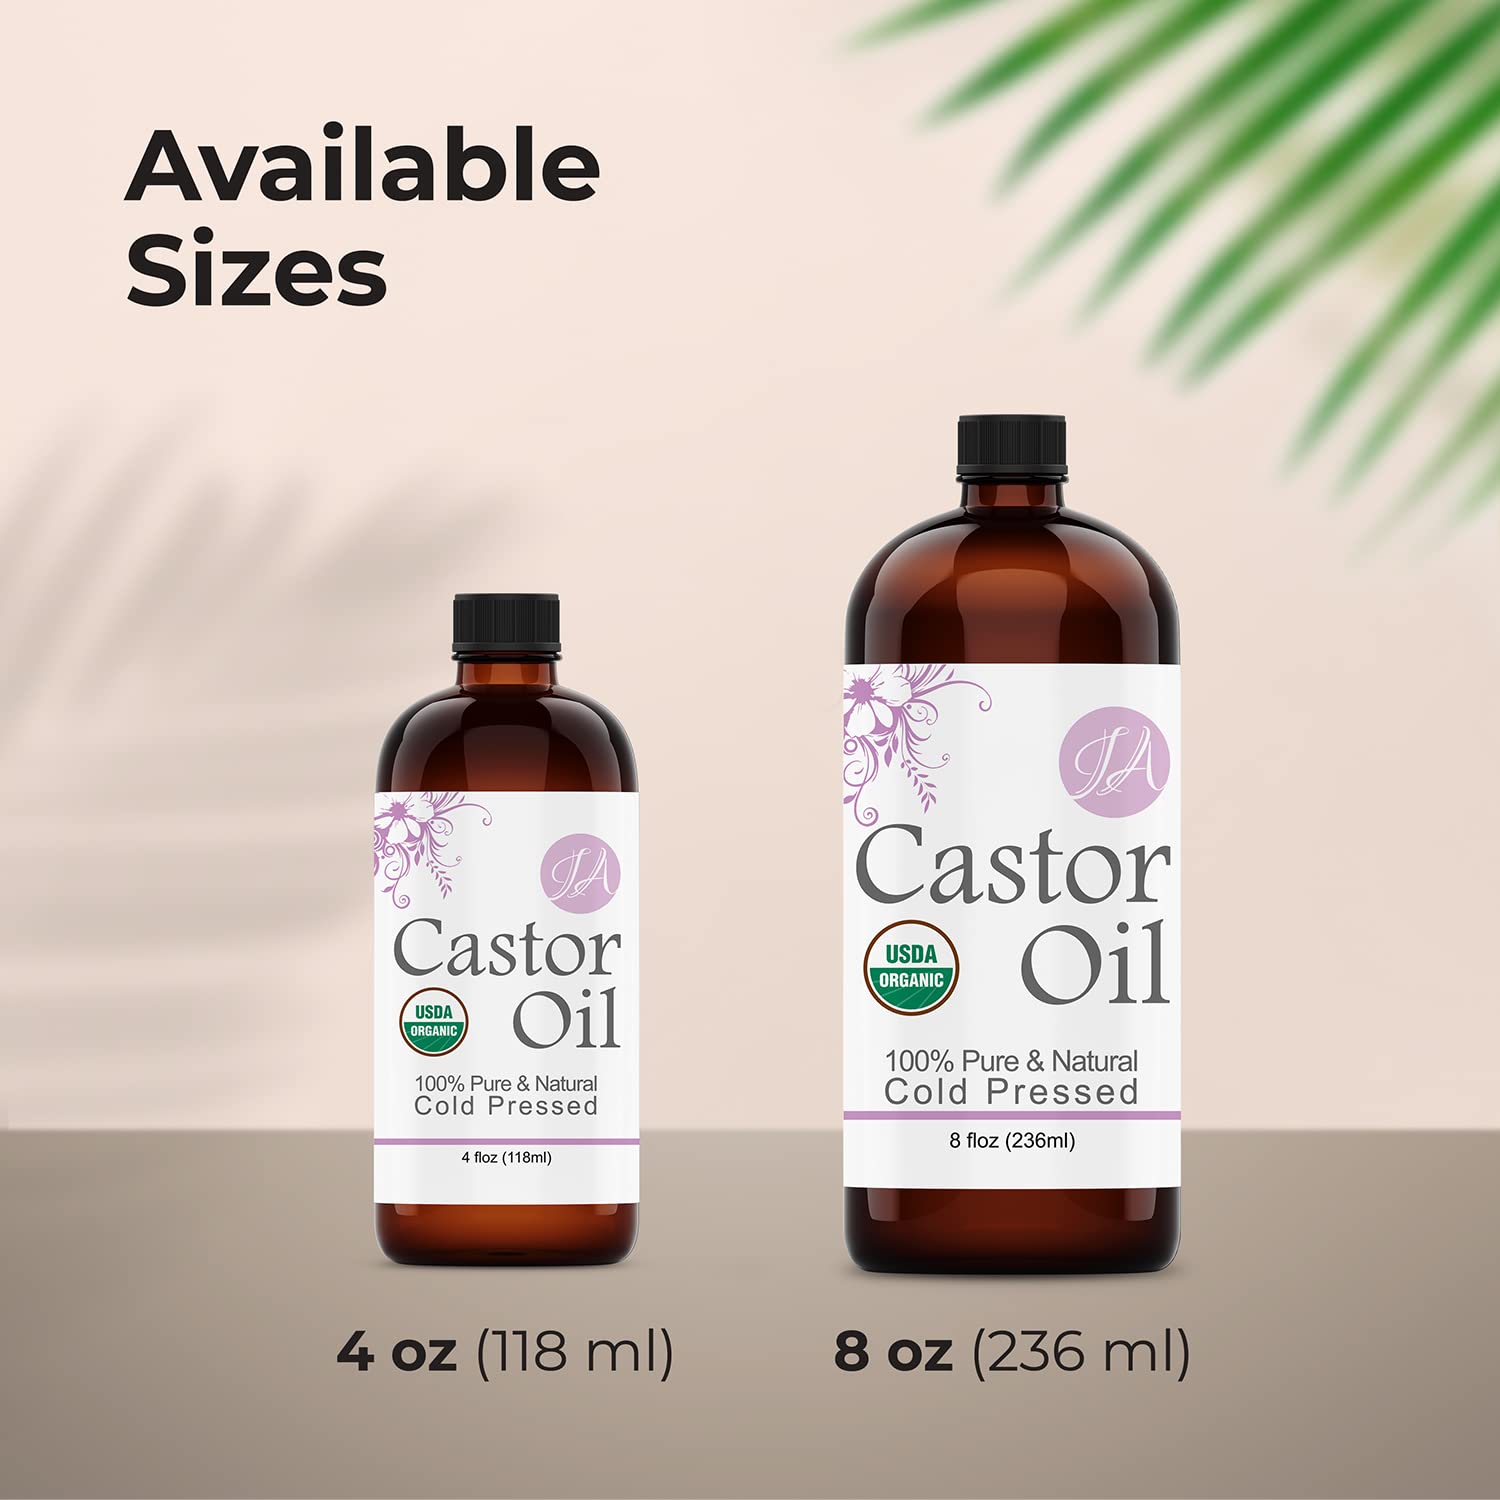 Castor Oil (Organic - 4oz) Pure & Natural - Cold Pressed - All-Natural Carrier Oil Solution for Lashes, Eyebrows, Hair, & More!